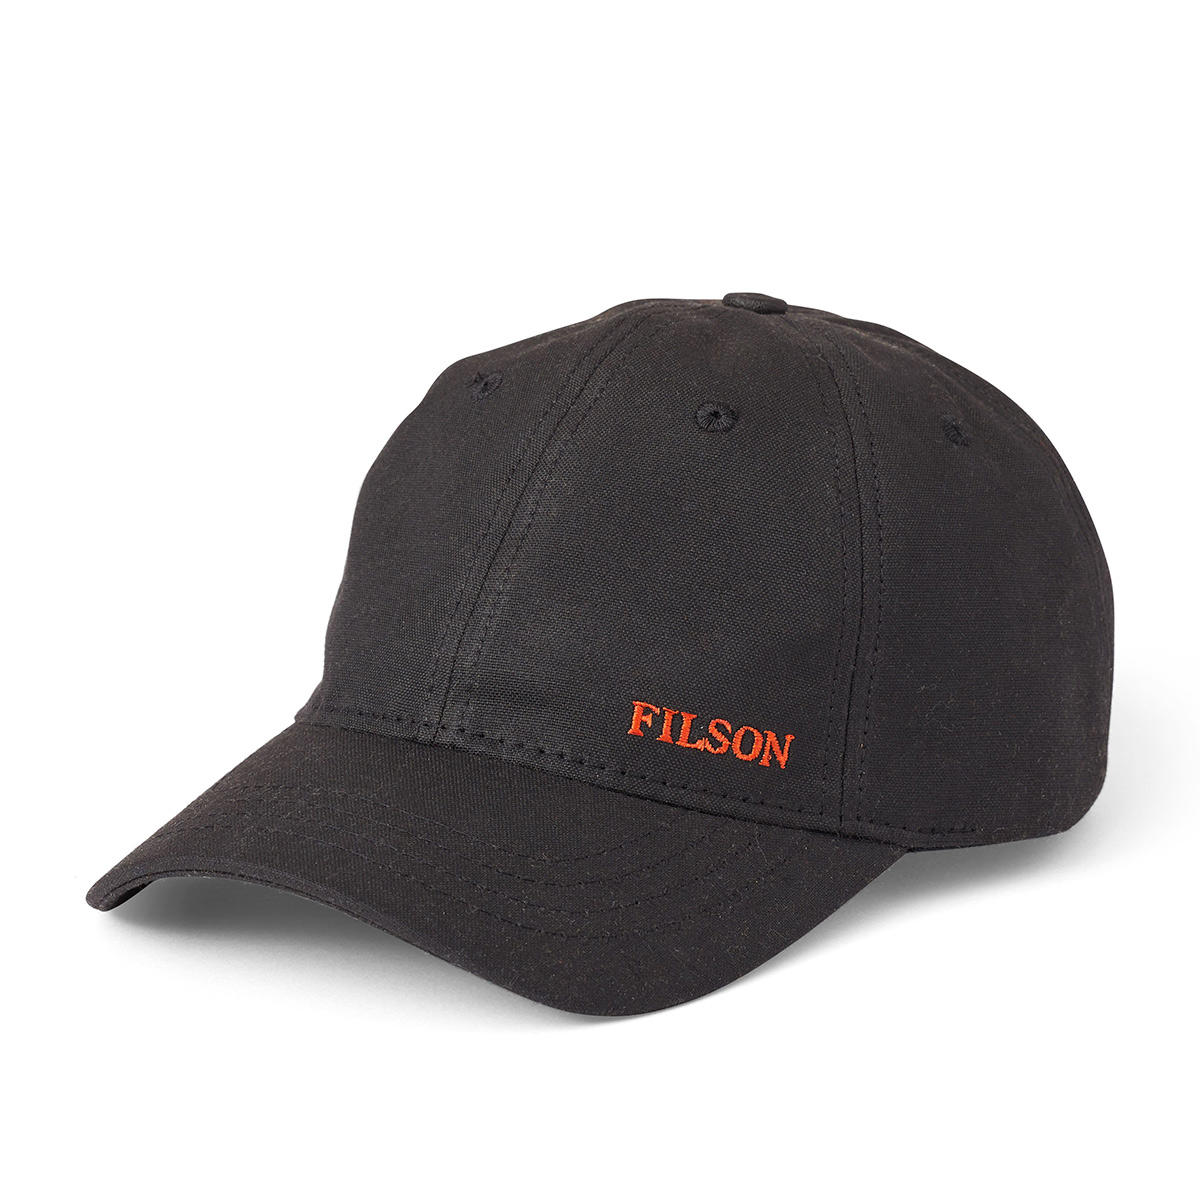 Filson Oil Tin Low-Profile Cap 20172158 Black, to provide years of service